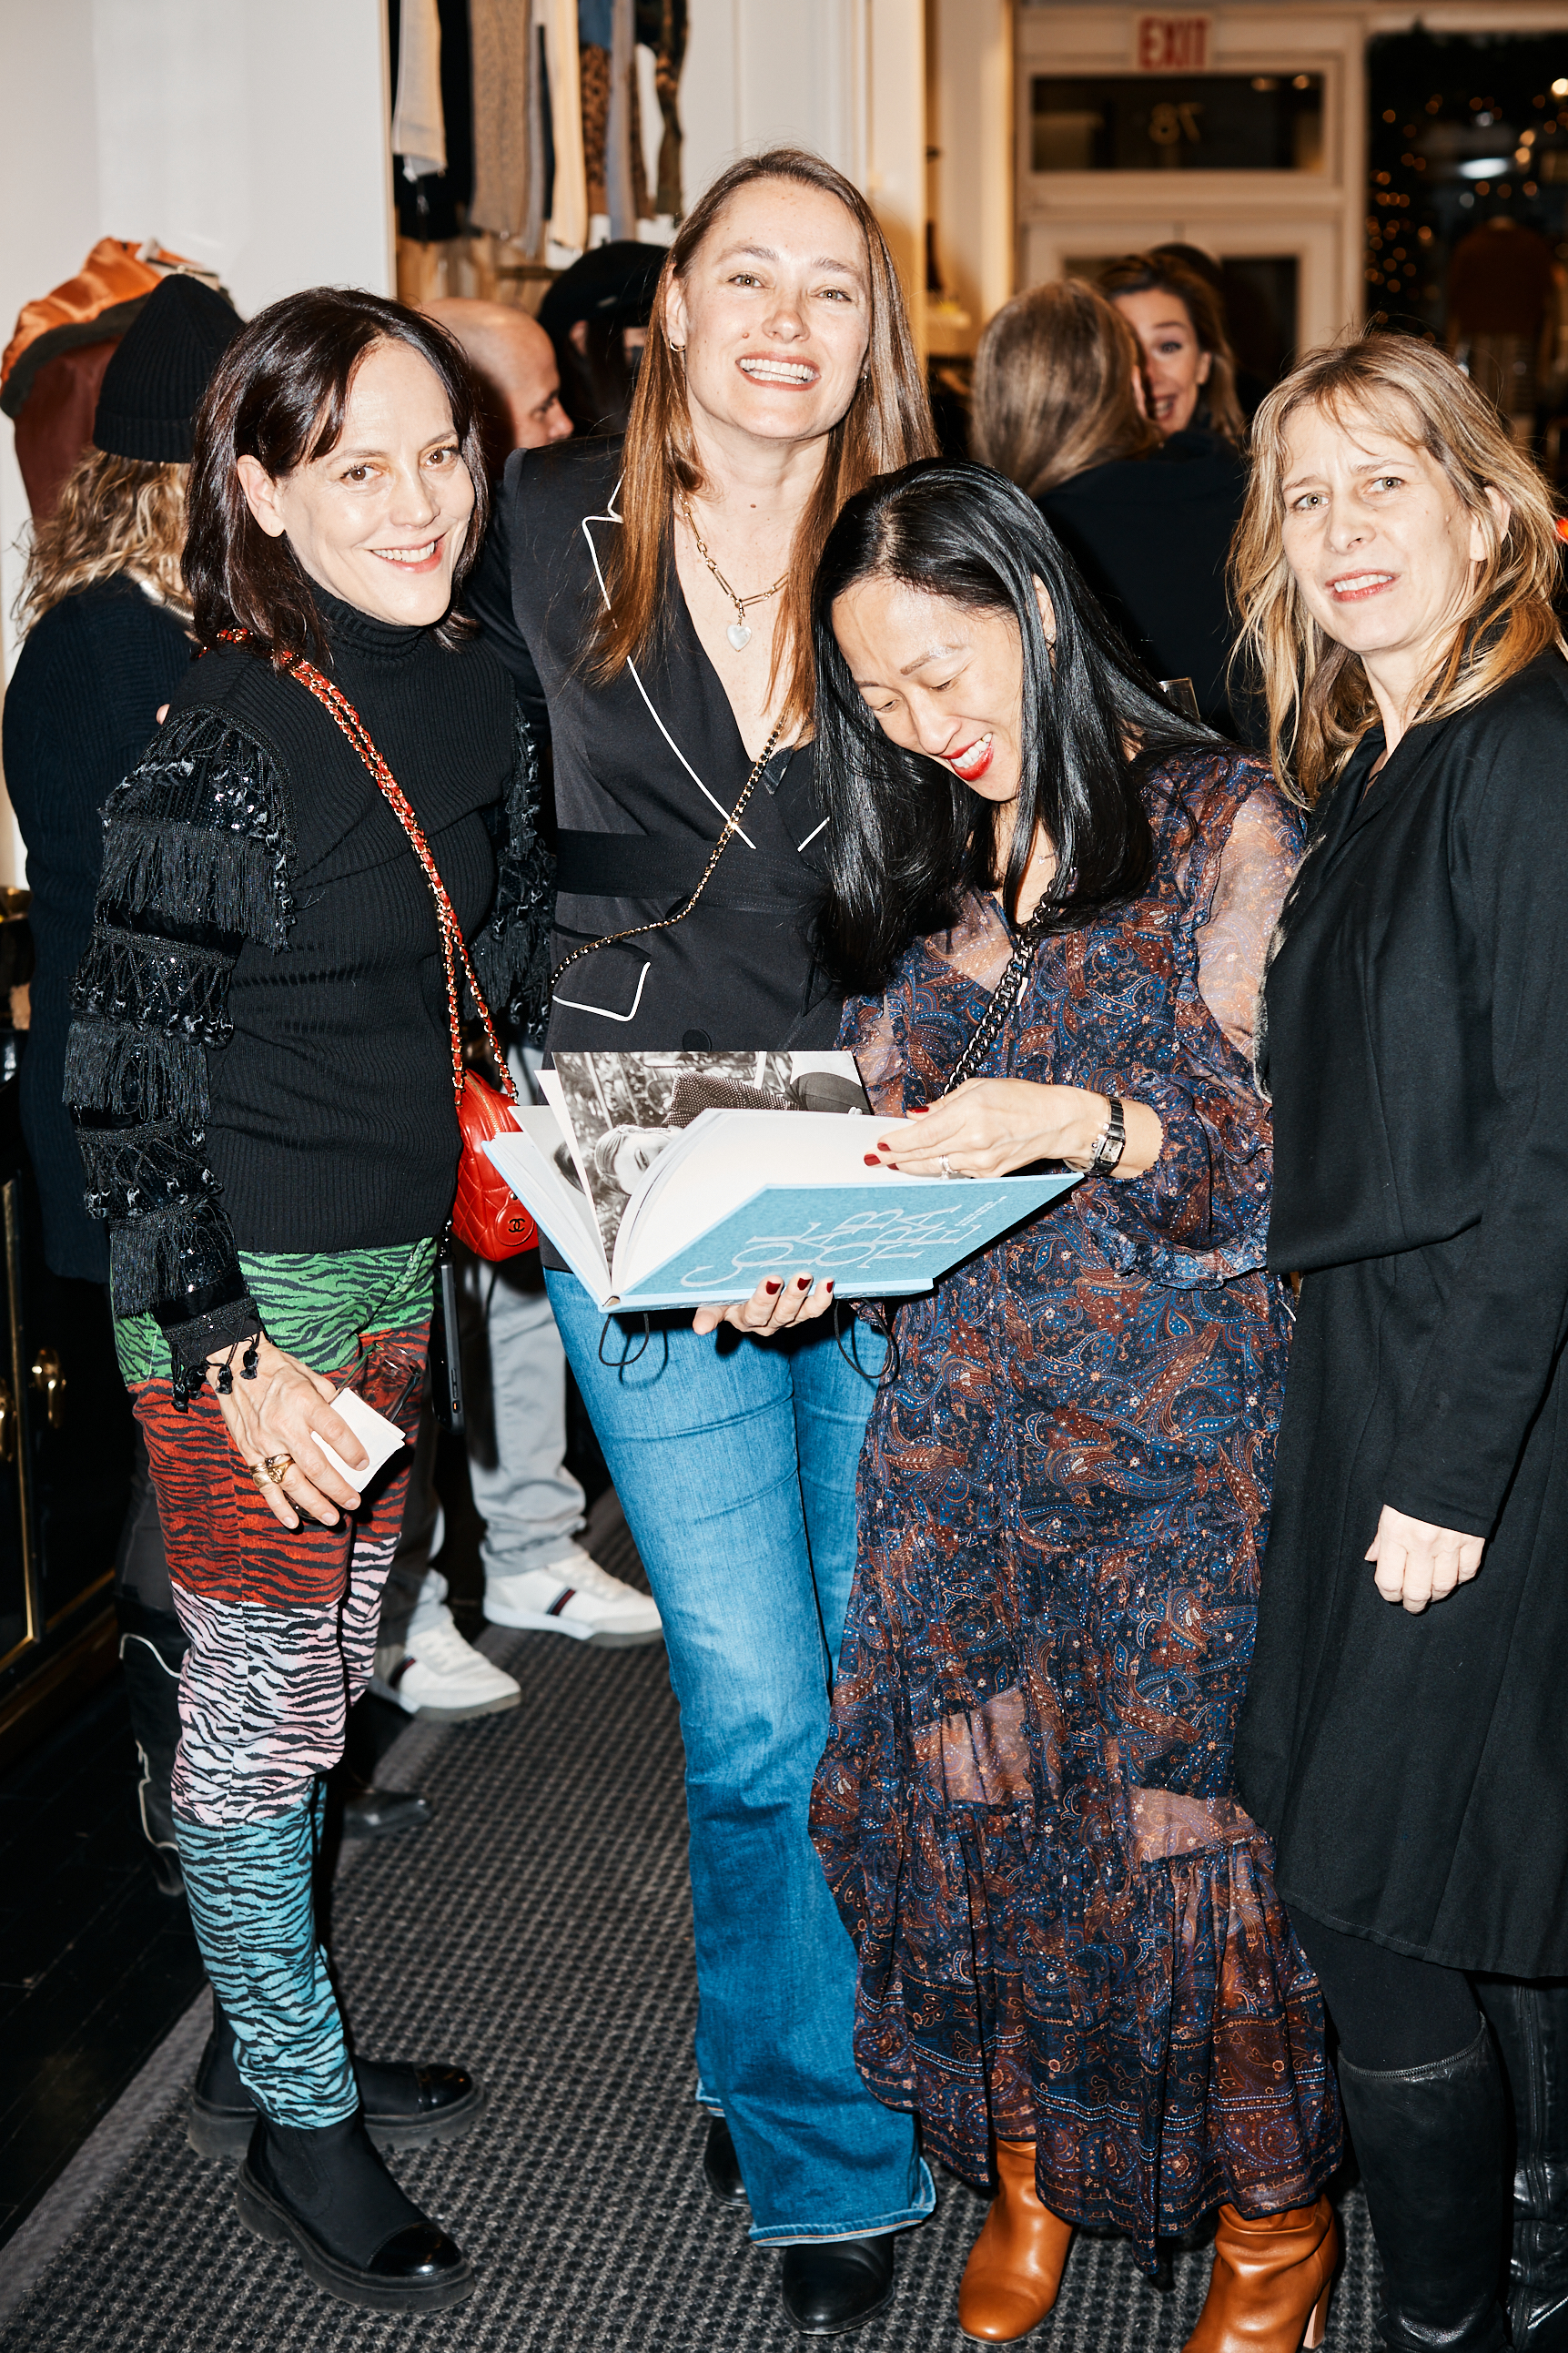 Kristy Hurt surrounded by guests at her book launch